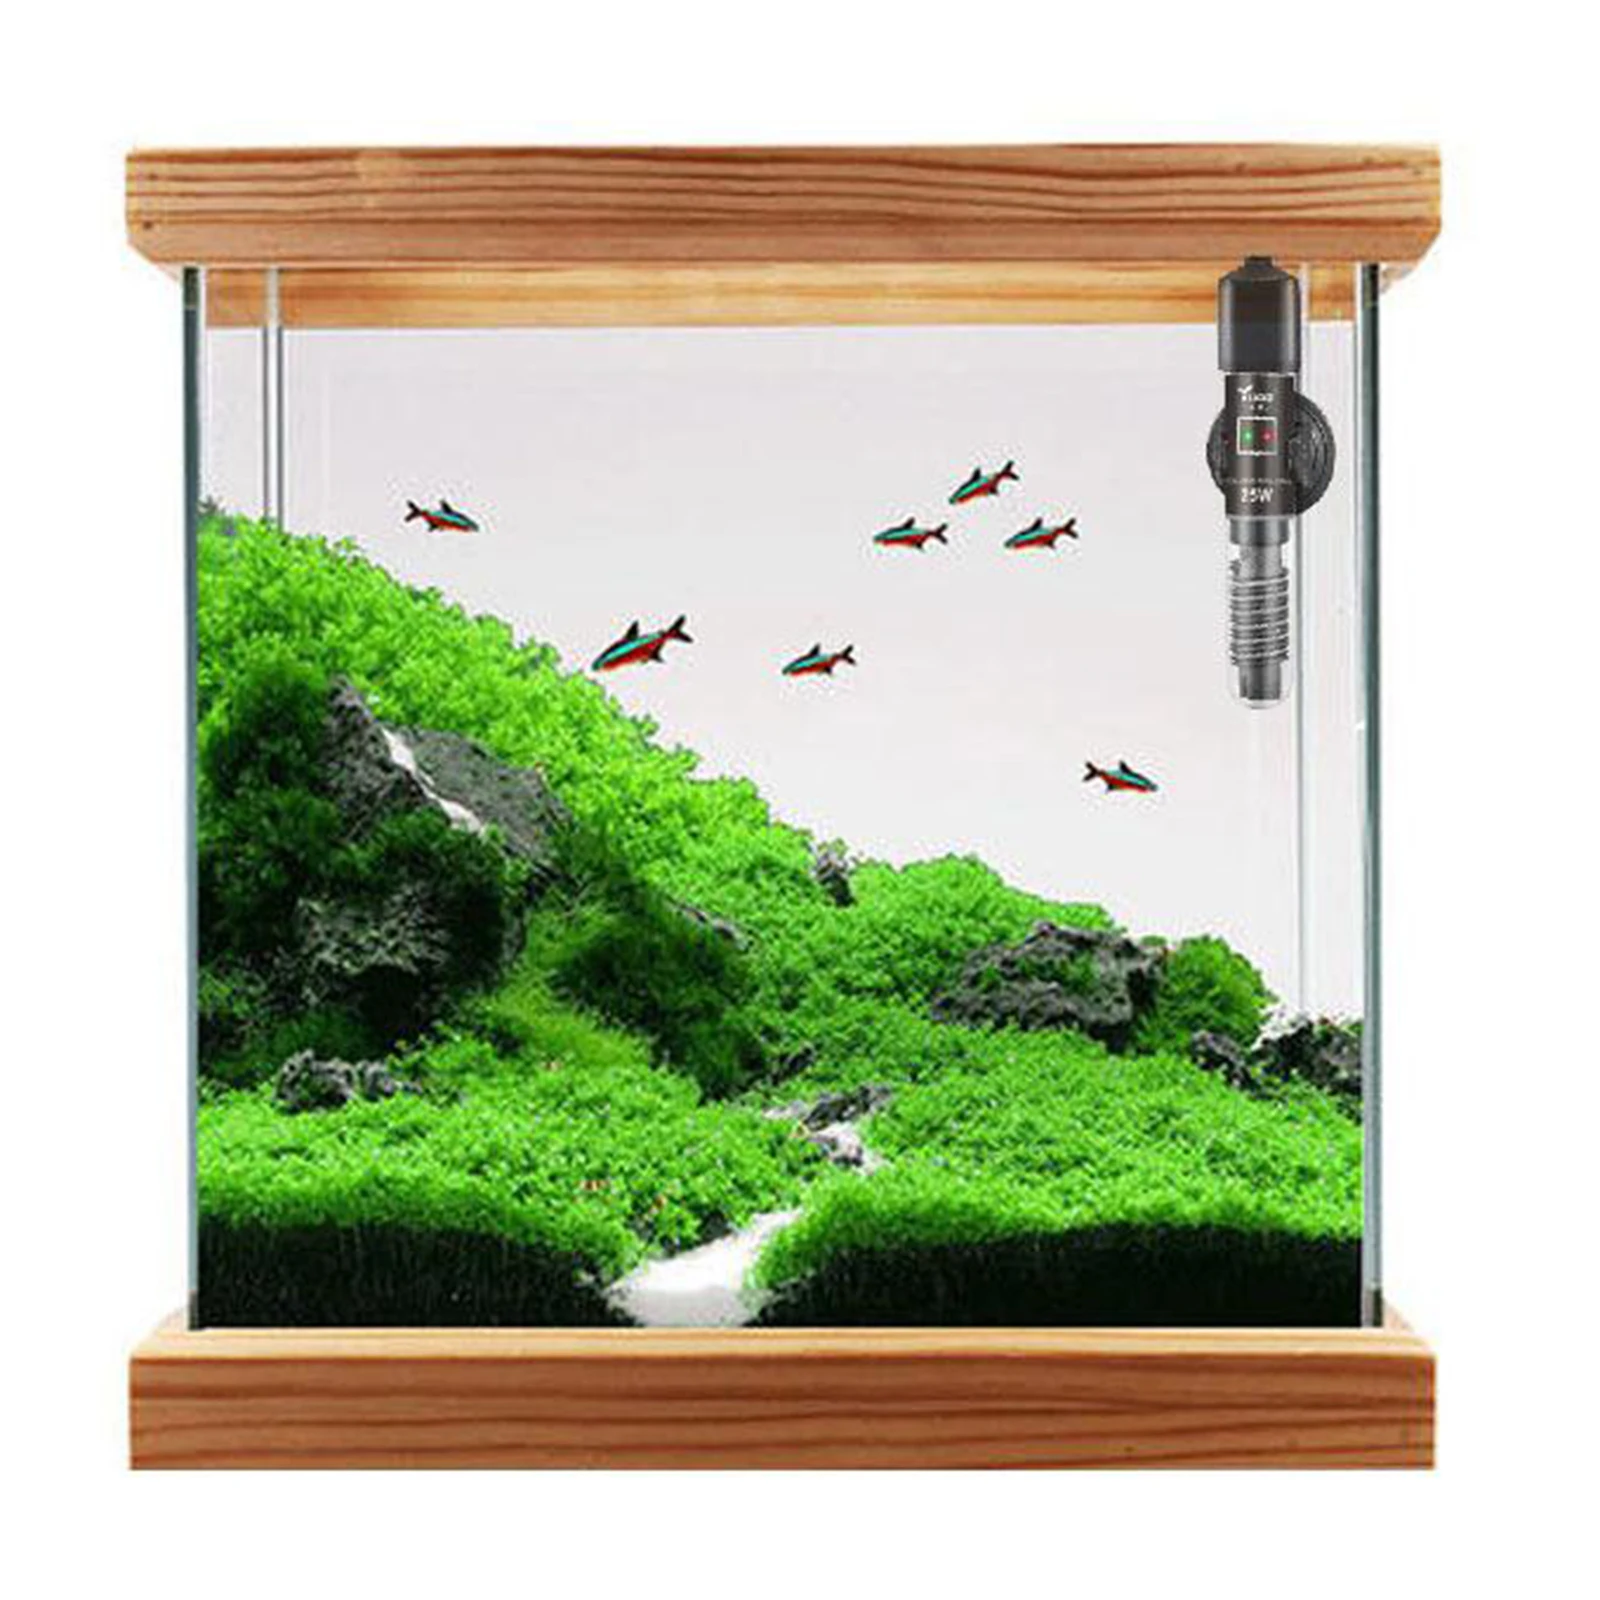 Small Aquarium Fishtank Water Heater Fully Submersible US Plug,Convenient and Safe